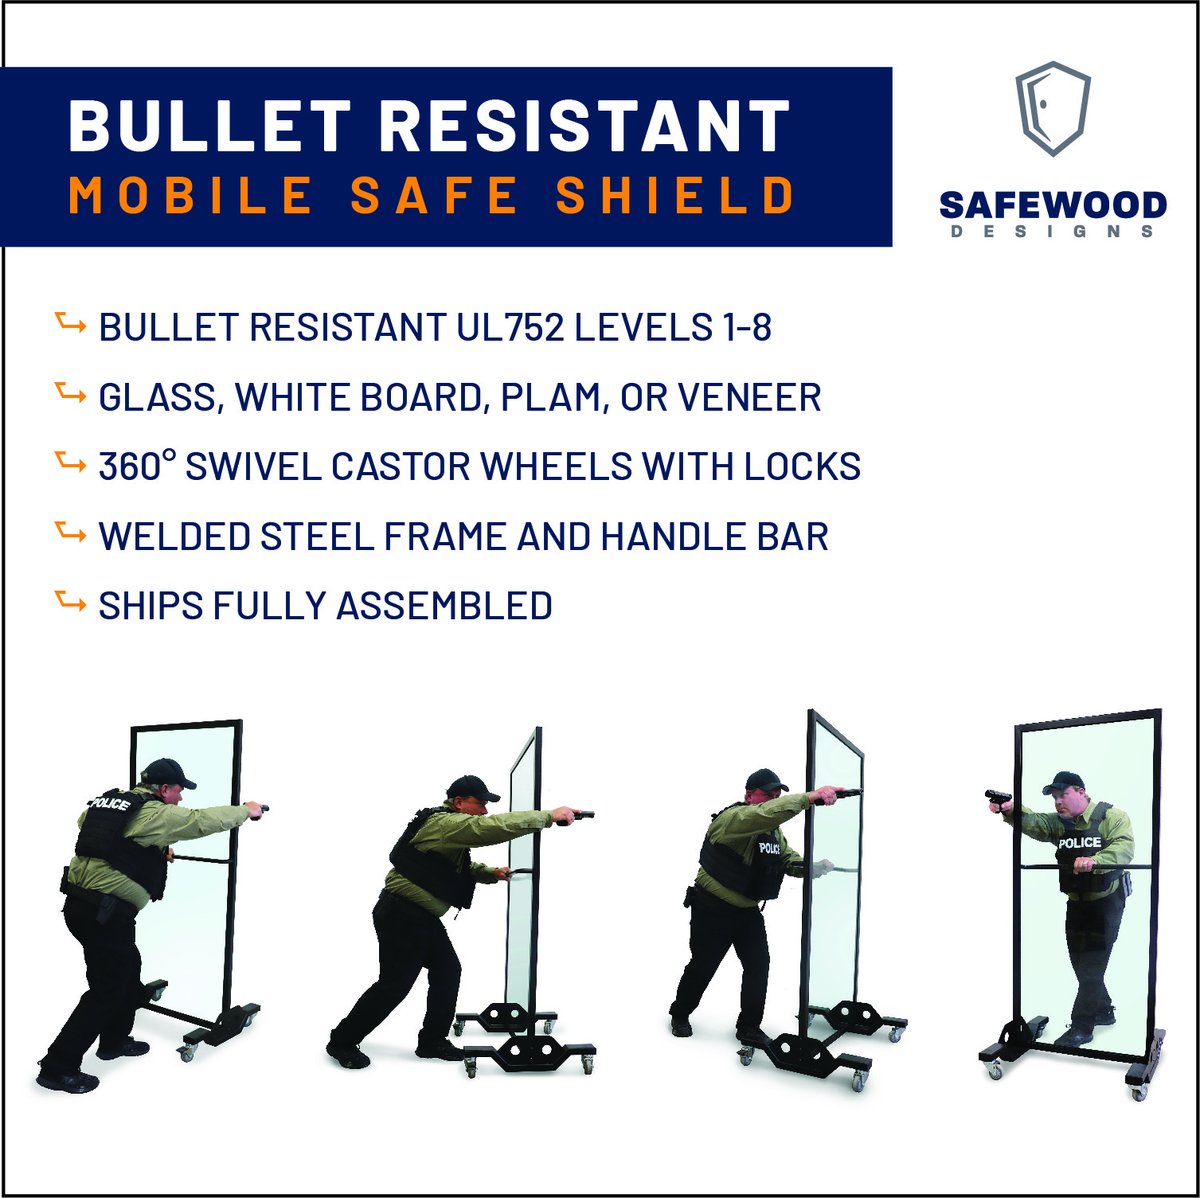 Our NEW Mobile Safe Shield is customizable with multiple material offerings to meet your security needs and design preferences. 

#shield #ballistic #ballisticshield #bulletproof #bulletresistant #safeschools #safebusiness #interiordesign #police #security #safety